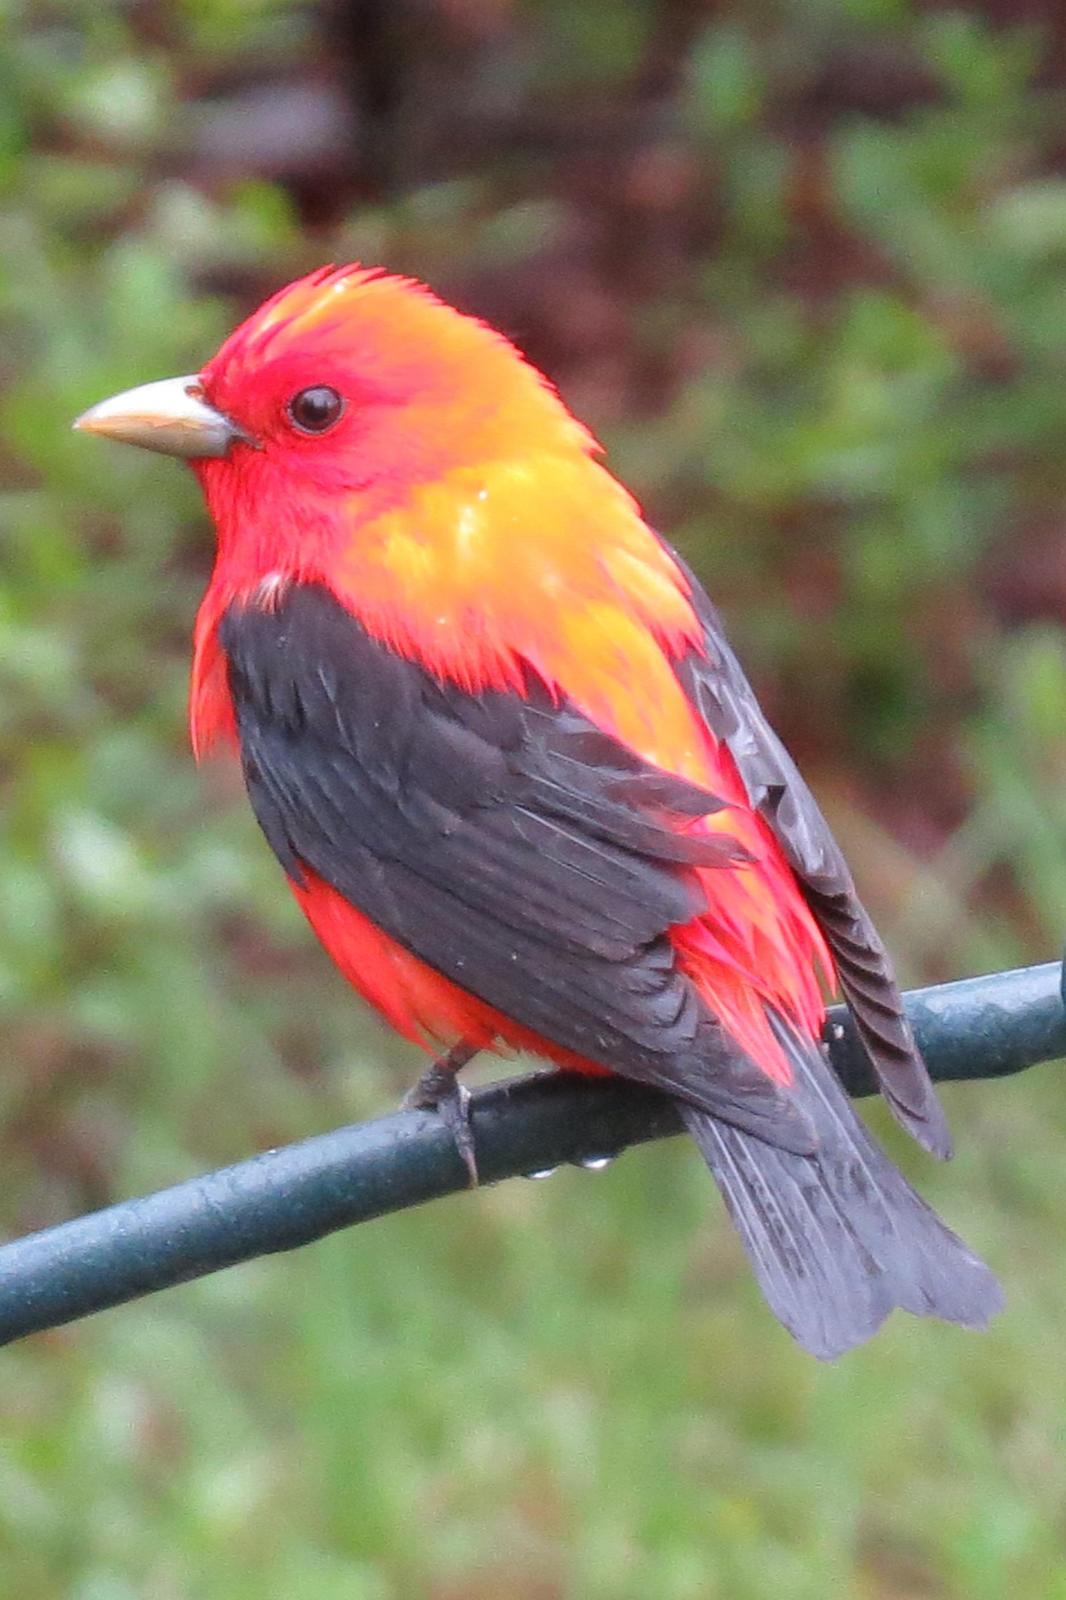 Scarlet Tanager Photo by Enid Bachman